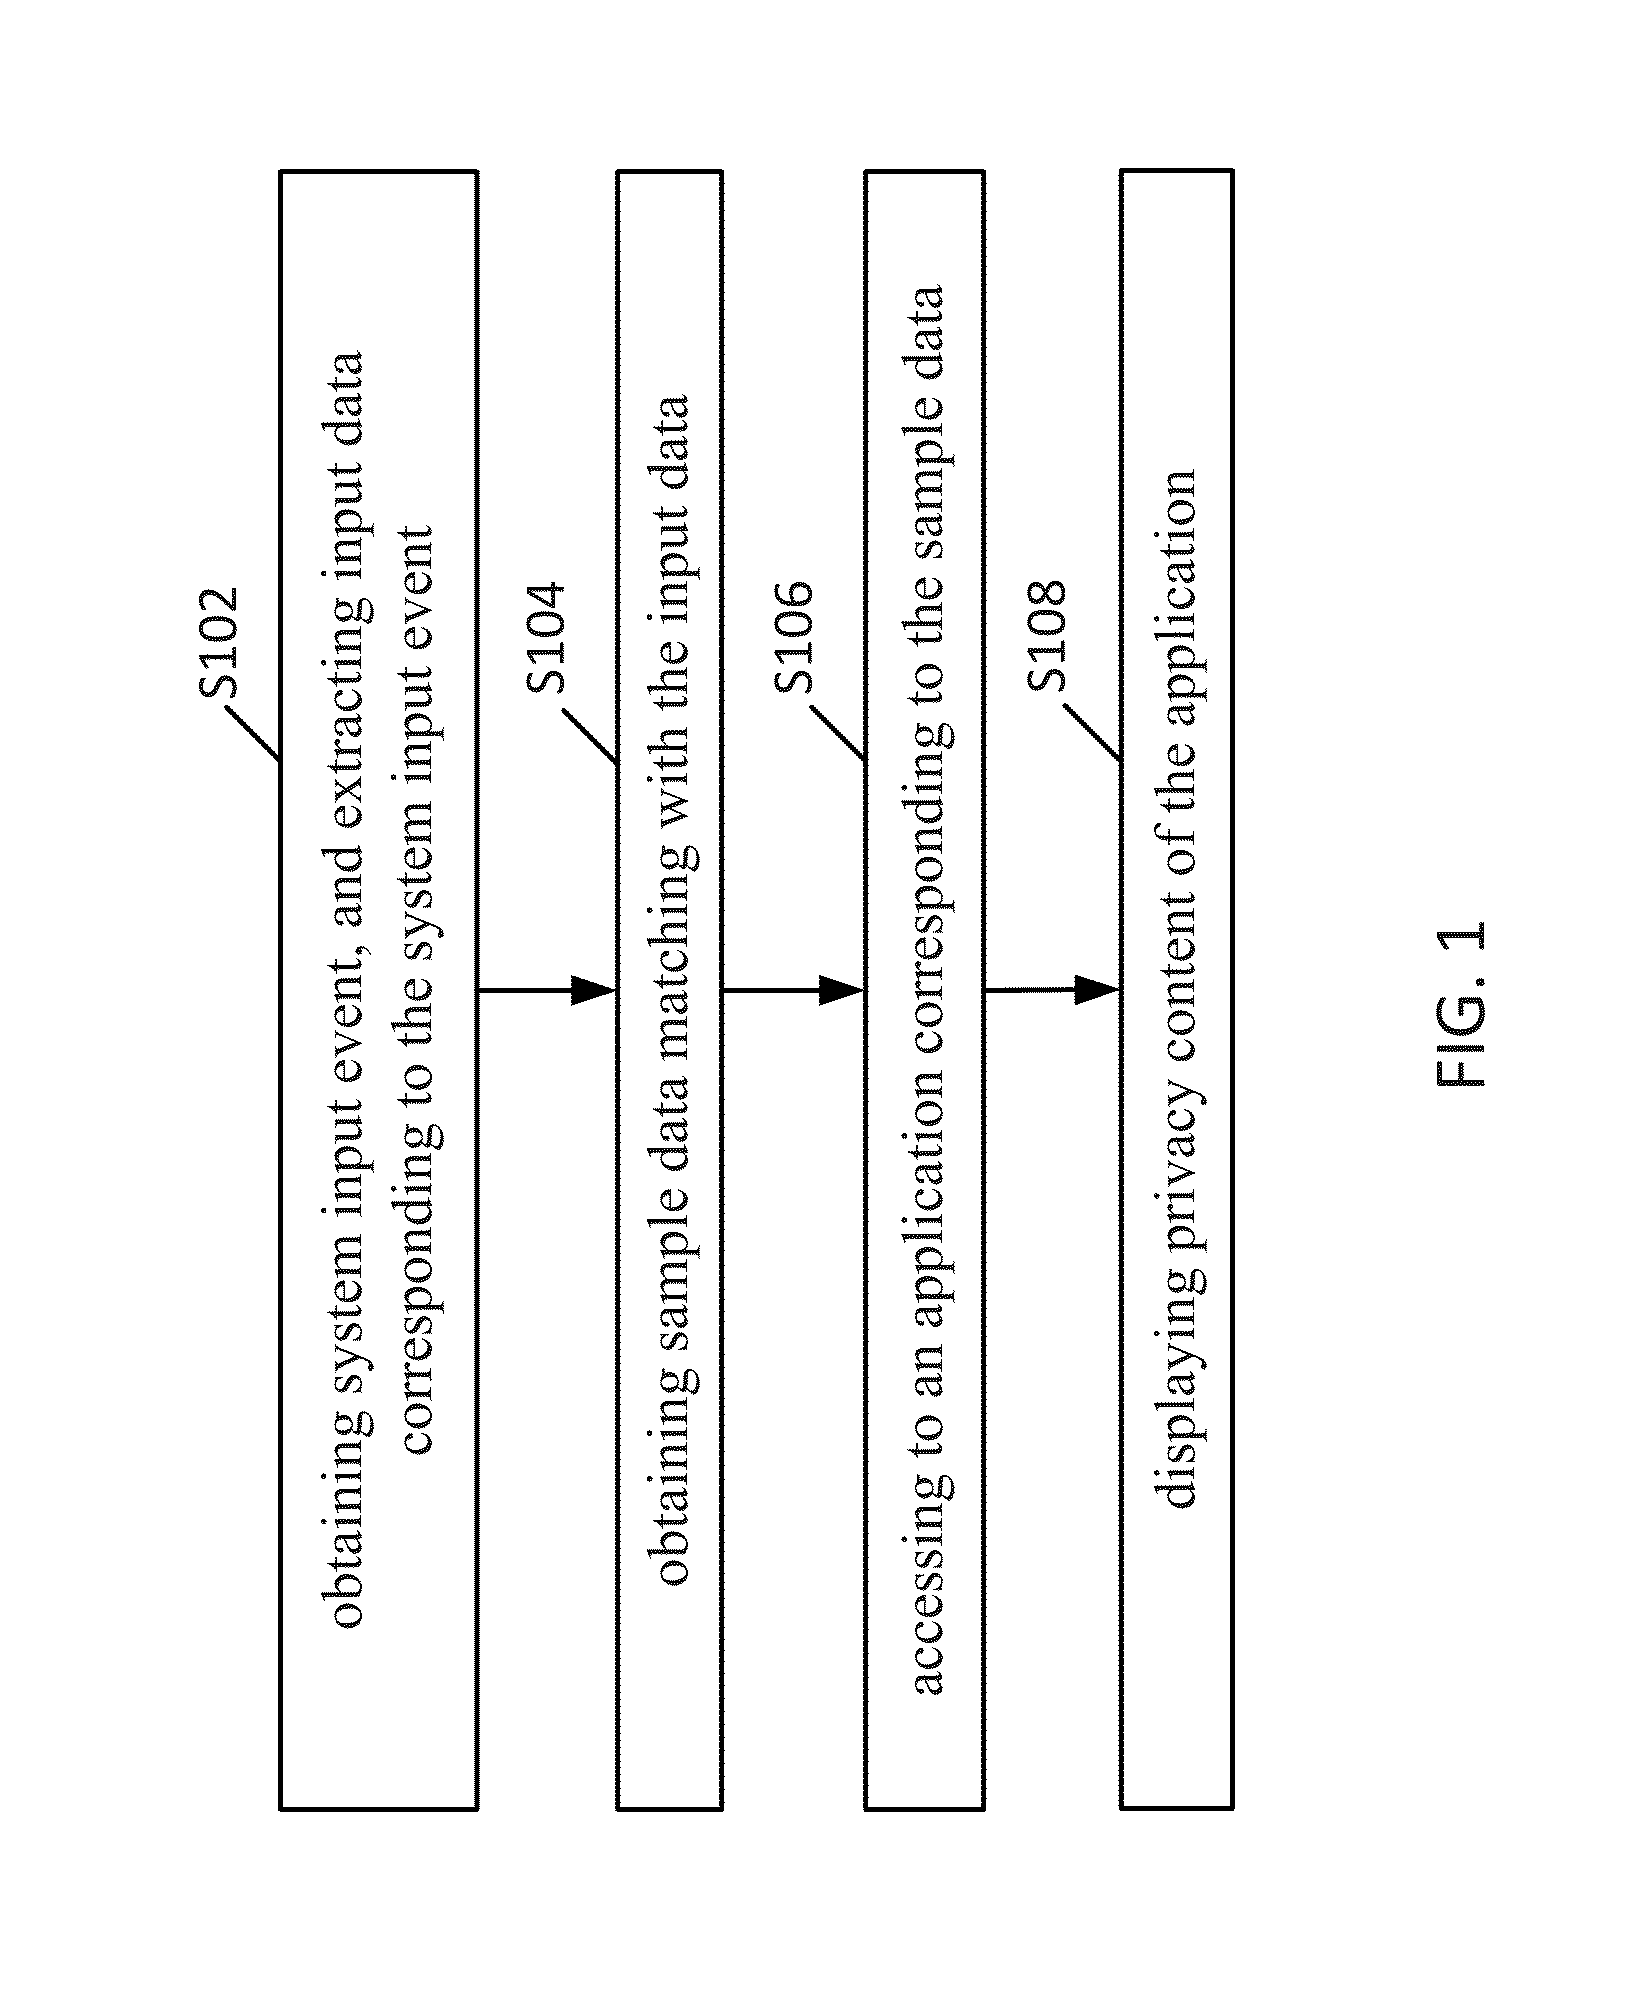 Method and apparatus for visiting privacy content